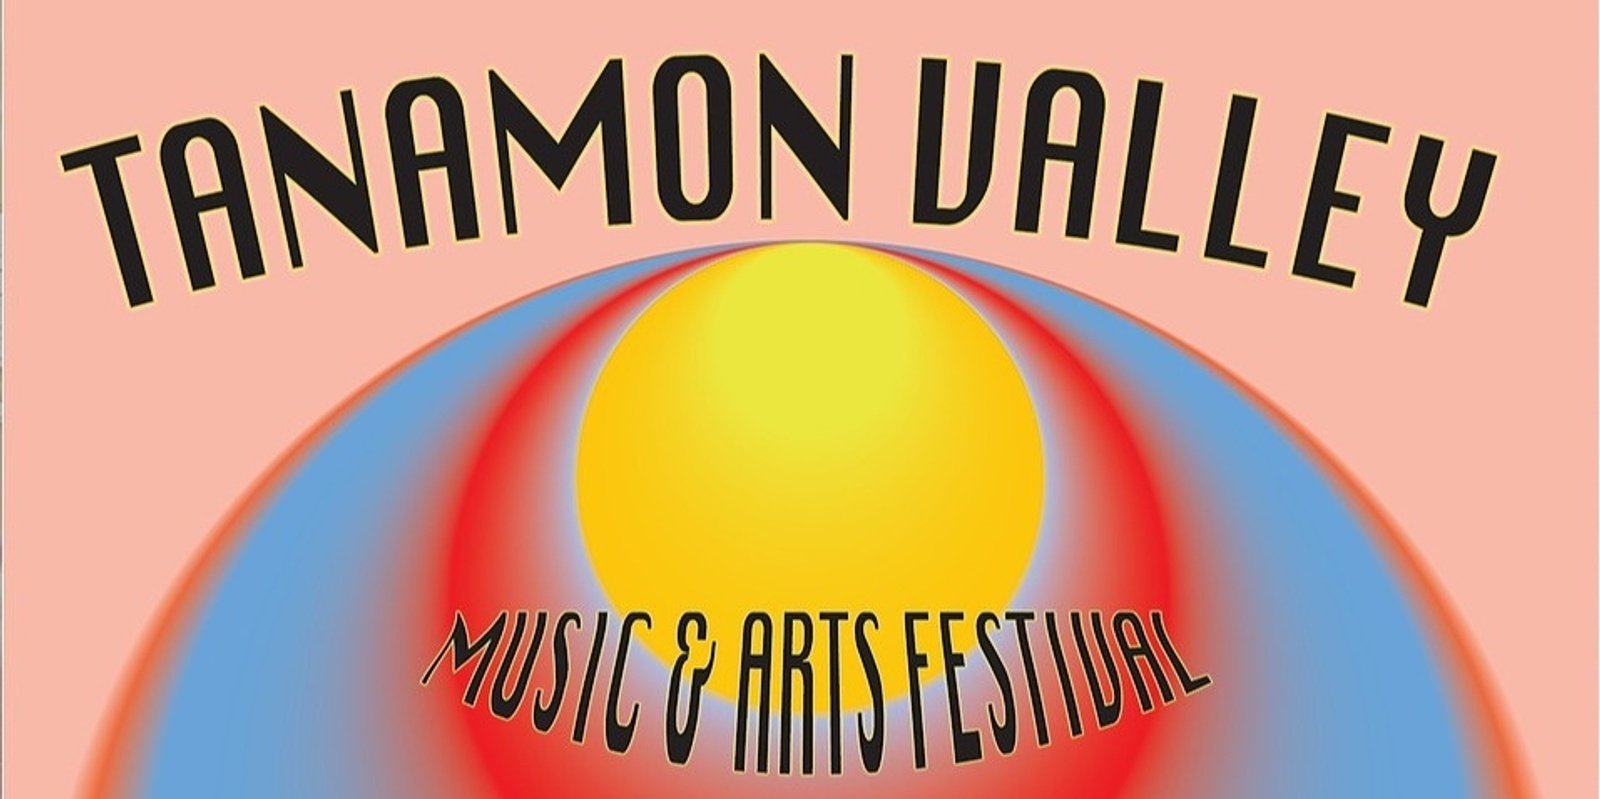 Banner image for Tanamon Valley Music and Arts Festival